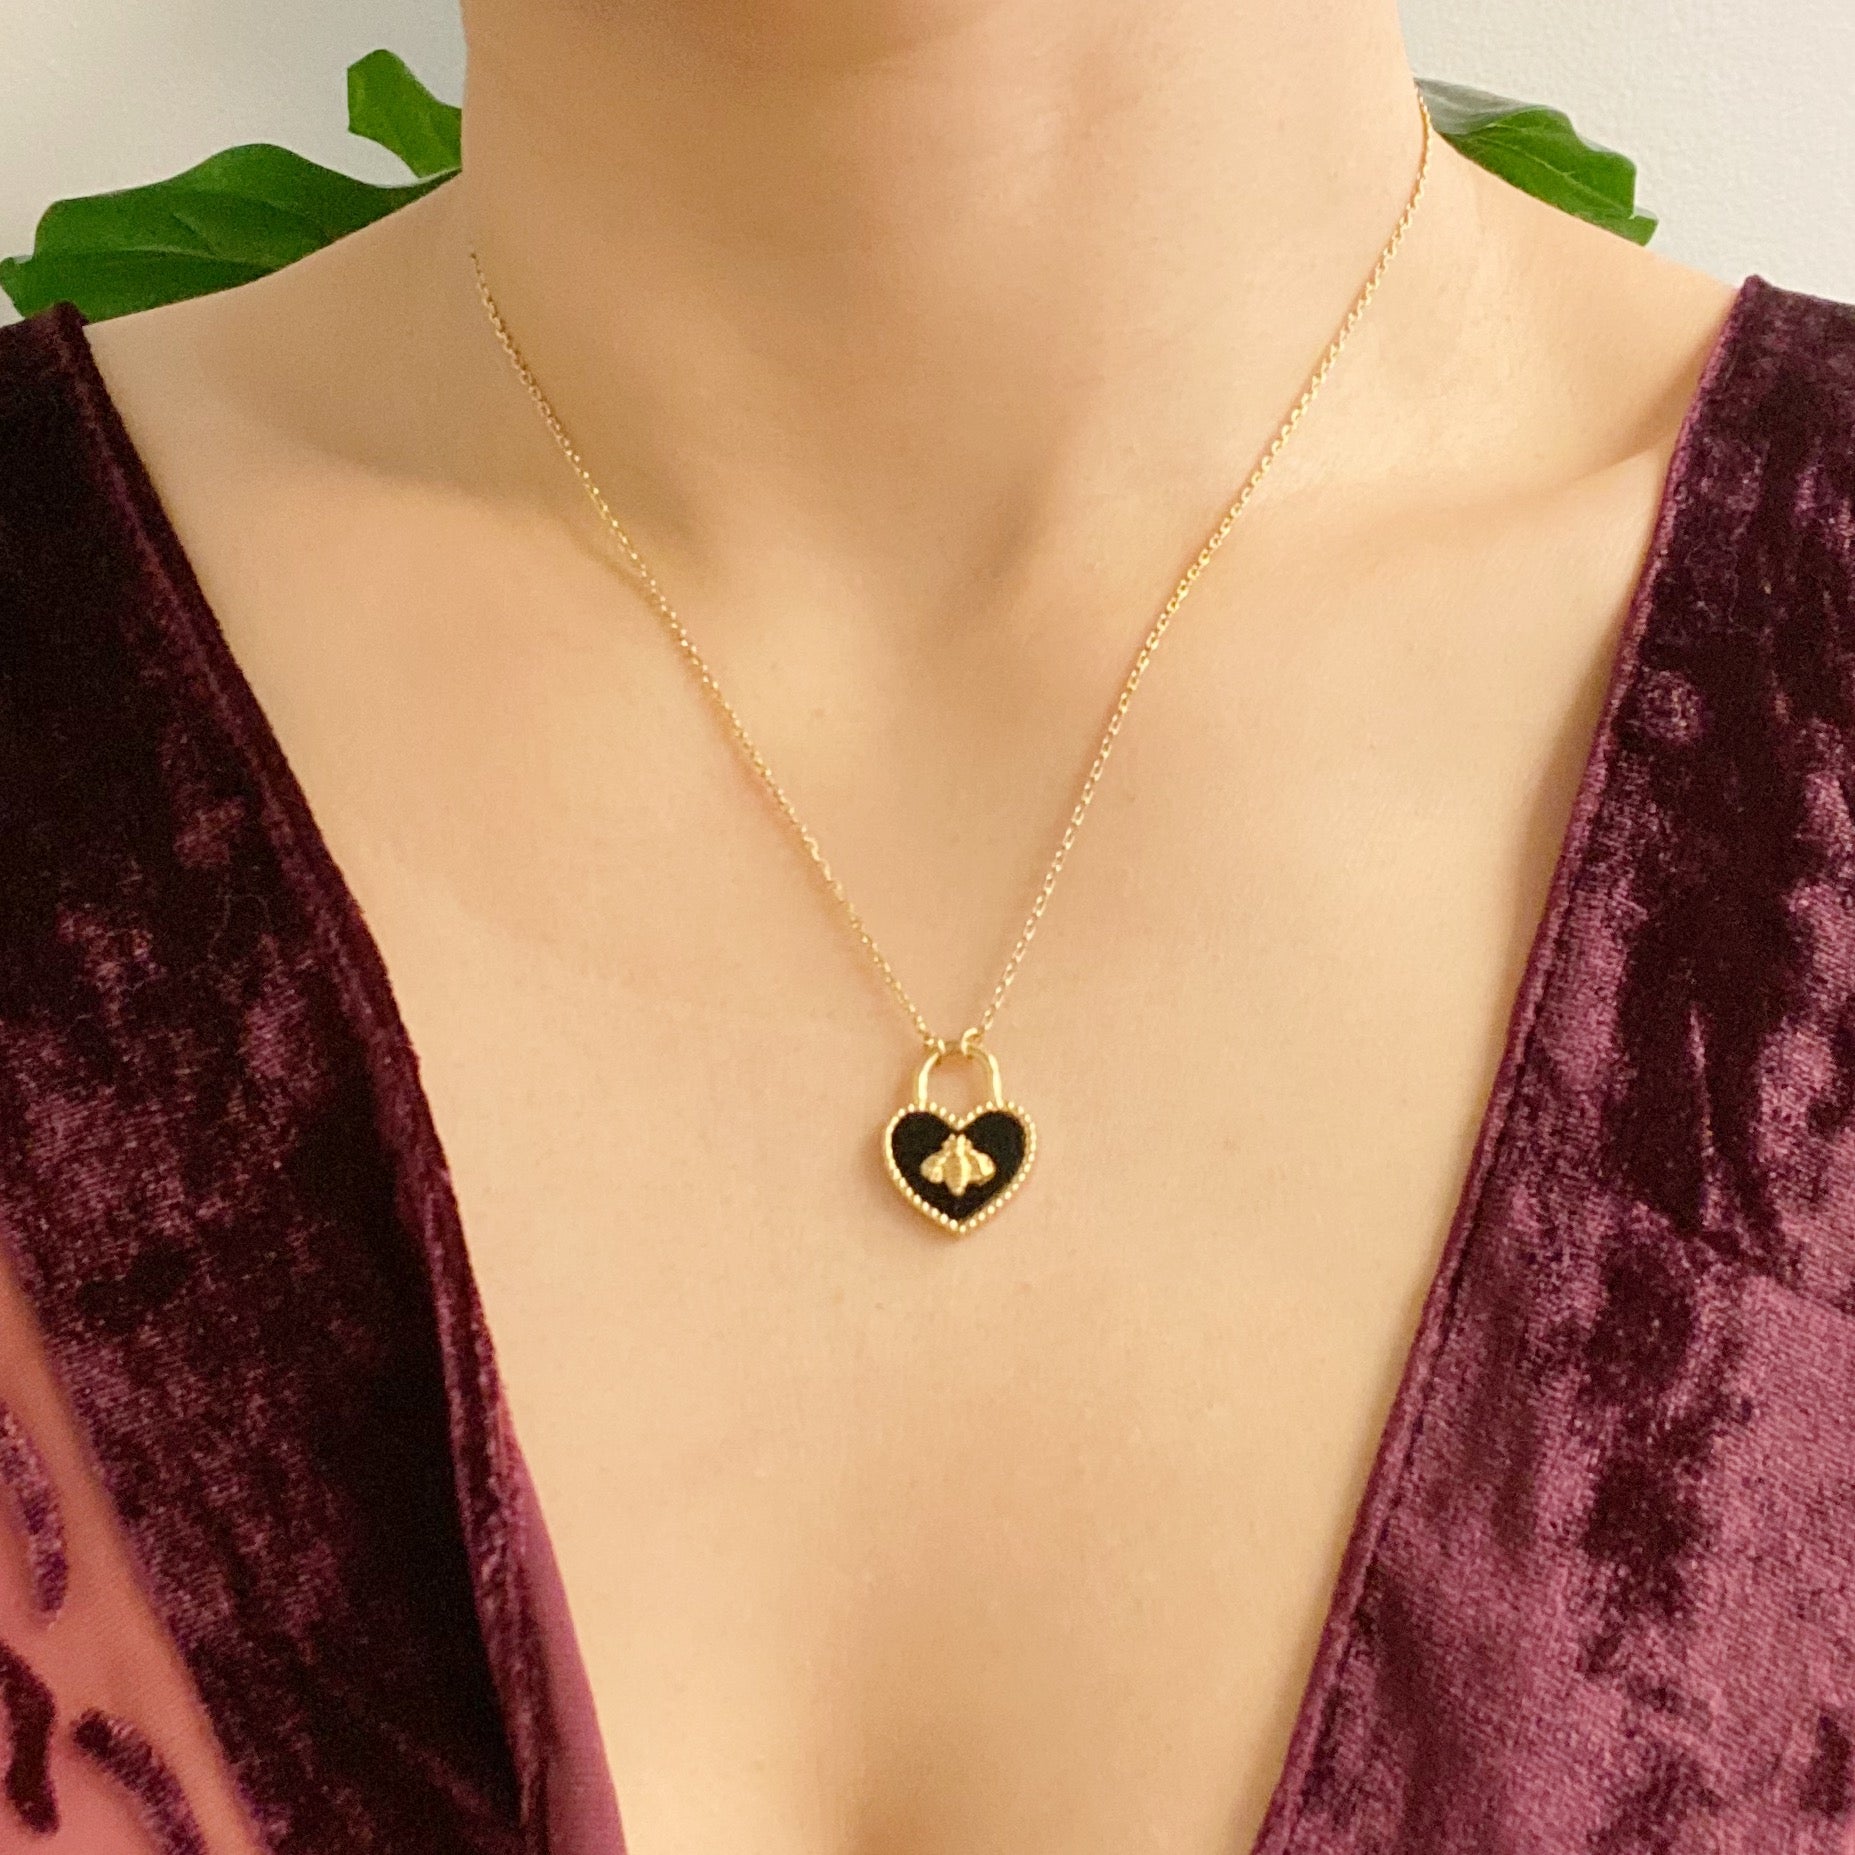 Bee Heartful Necklace - The Kindness Cause Gifts That Give Back Jewelry